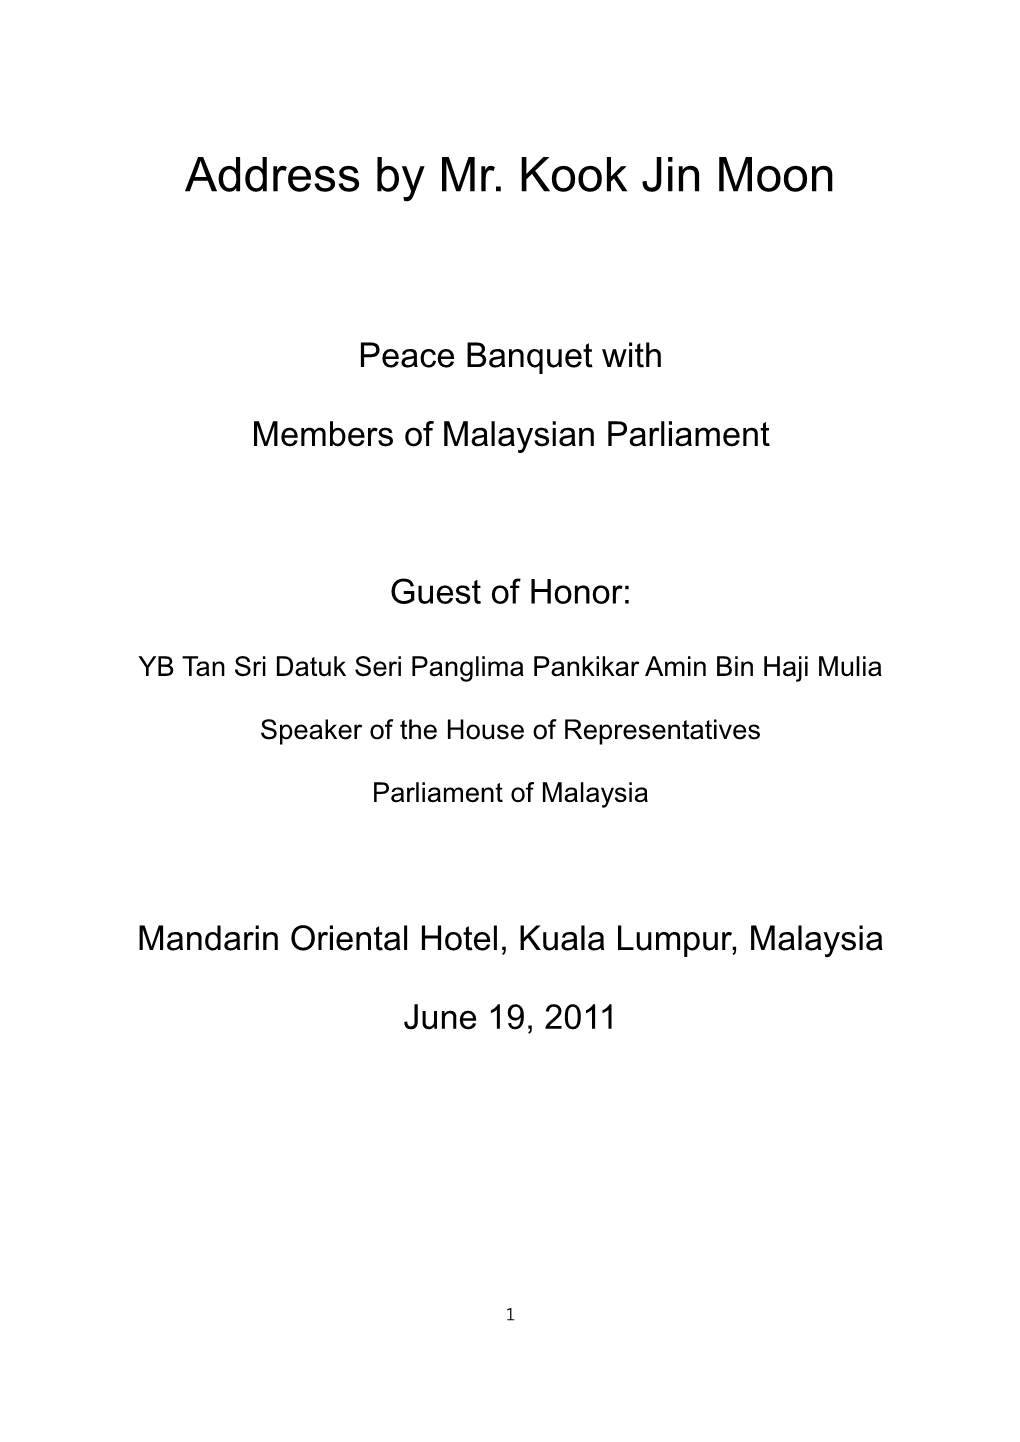 To Members of Malaysian Parliament